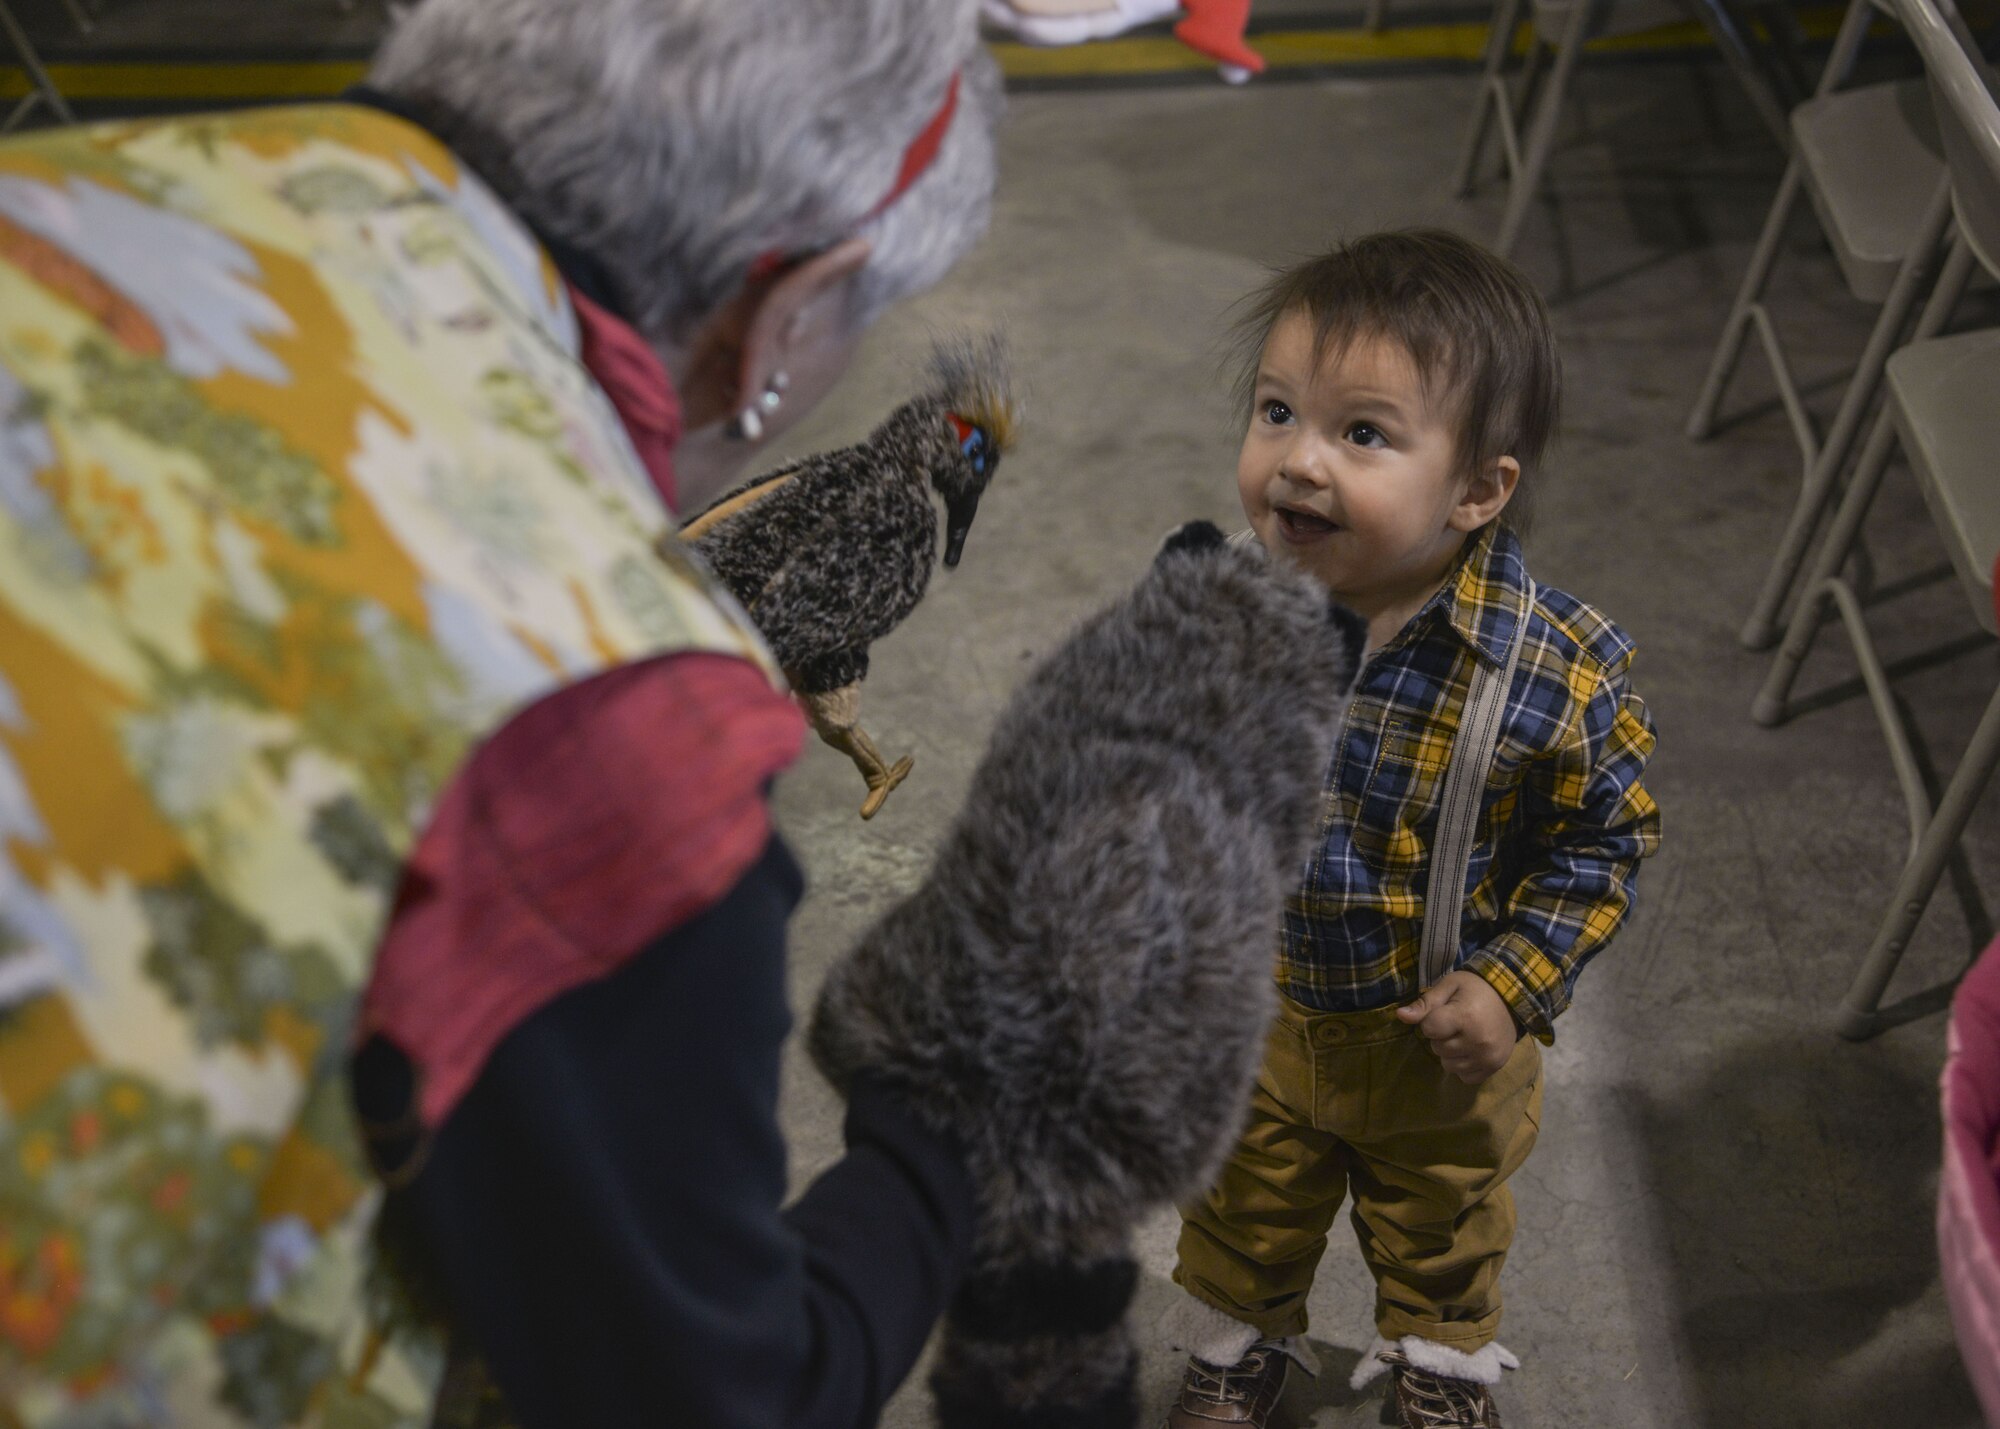 A child admires the animals at the Operation Holiday Cheer on Dec. 20 at Kirtland Air Force Base, New Mexico. This event is hosted by the Kirtland Fire Department and serves underprivileged families in the local communities by giving them a full holiday meal and a visit with Santa, who sends them home with a gift.